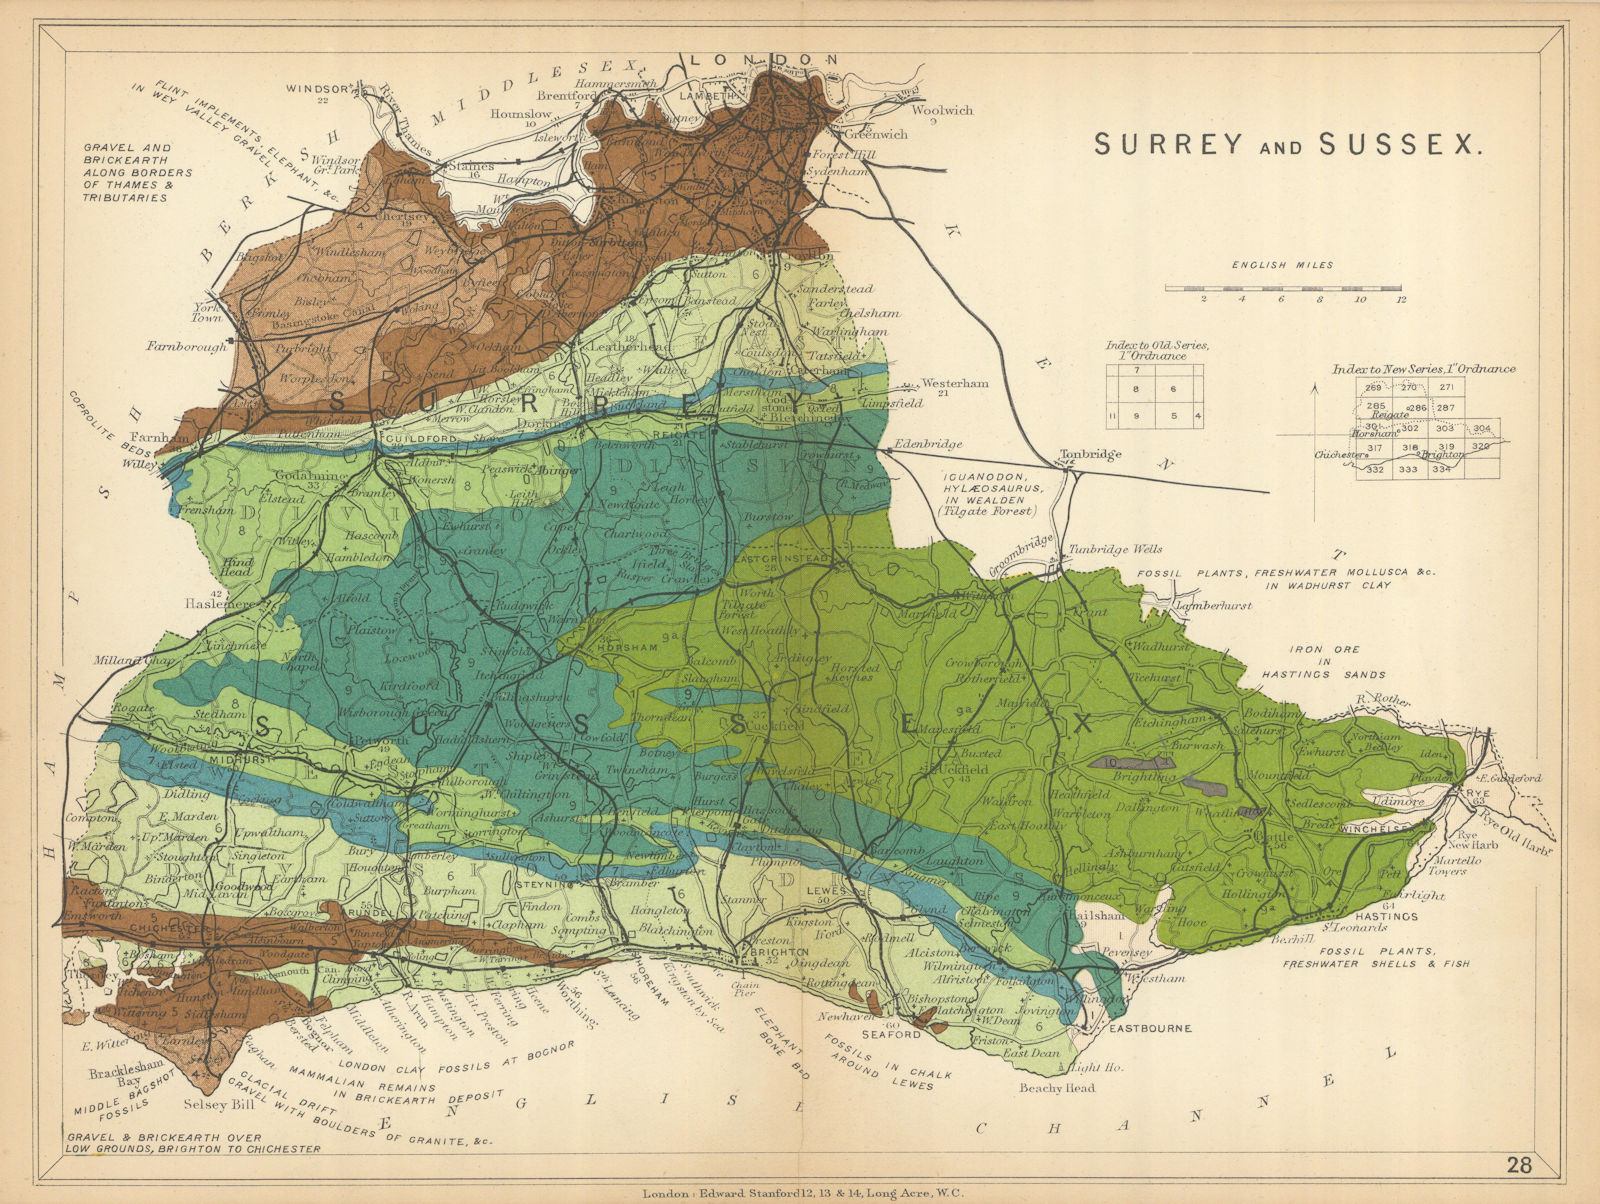 Associate Product SURREY AND SUSSEX Geological map. STANFORD 1904 old antique plan chart